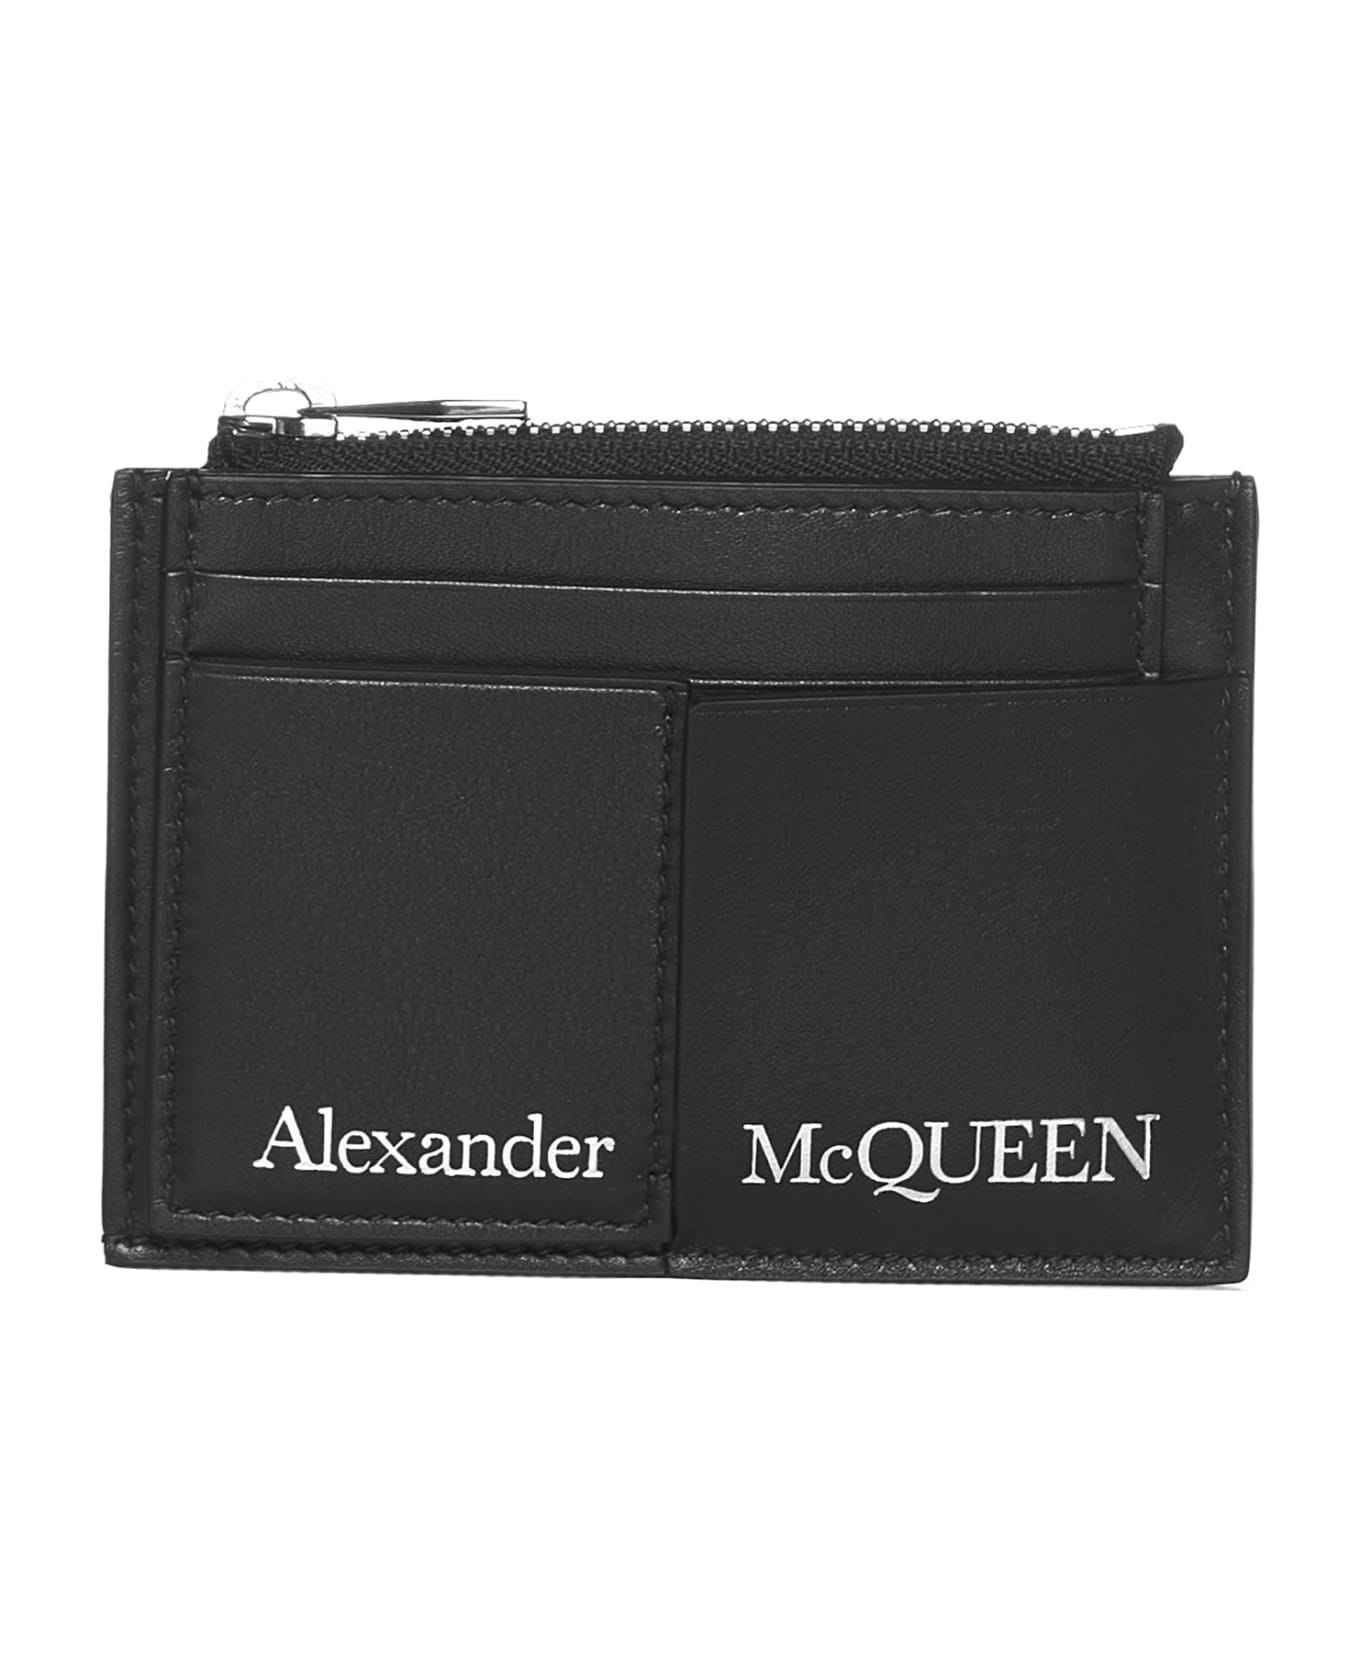 Card Holder With Logo - 1